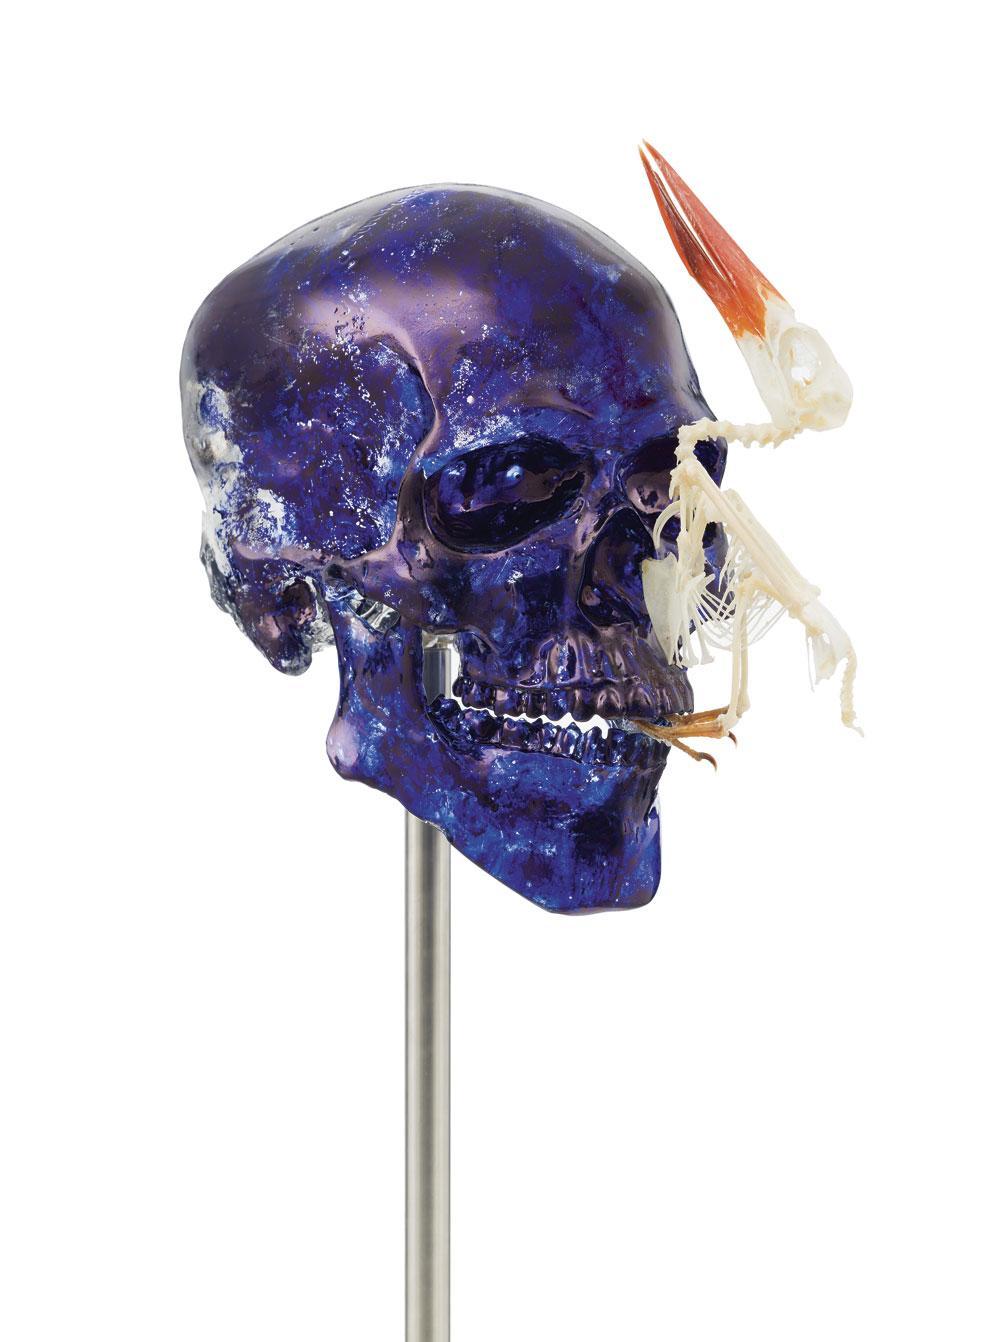 Jan Fabre, Skull with blue-breasted kingfisher.